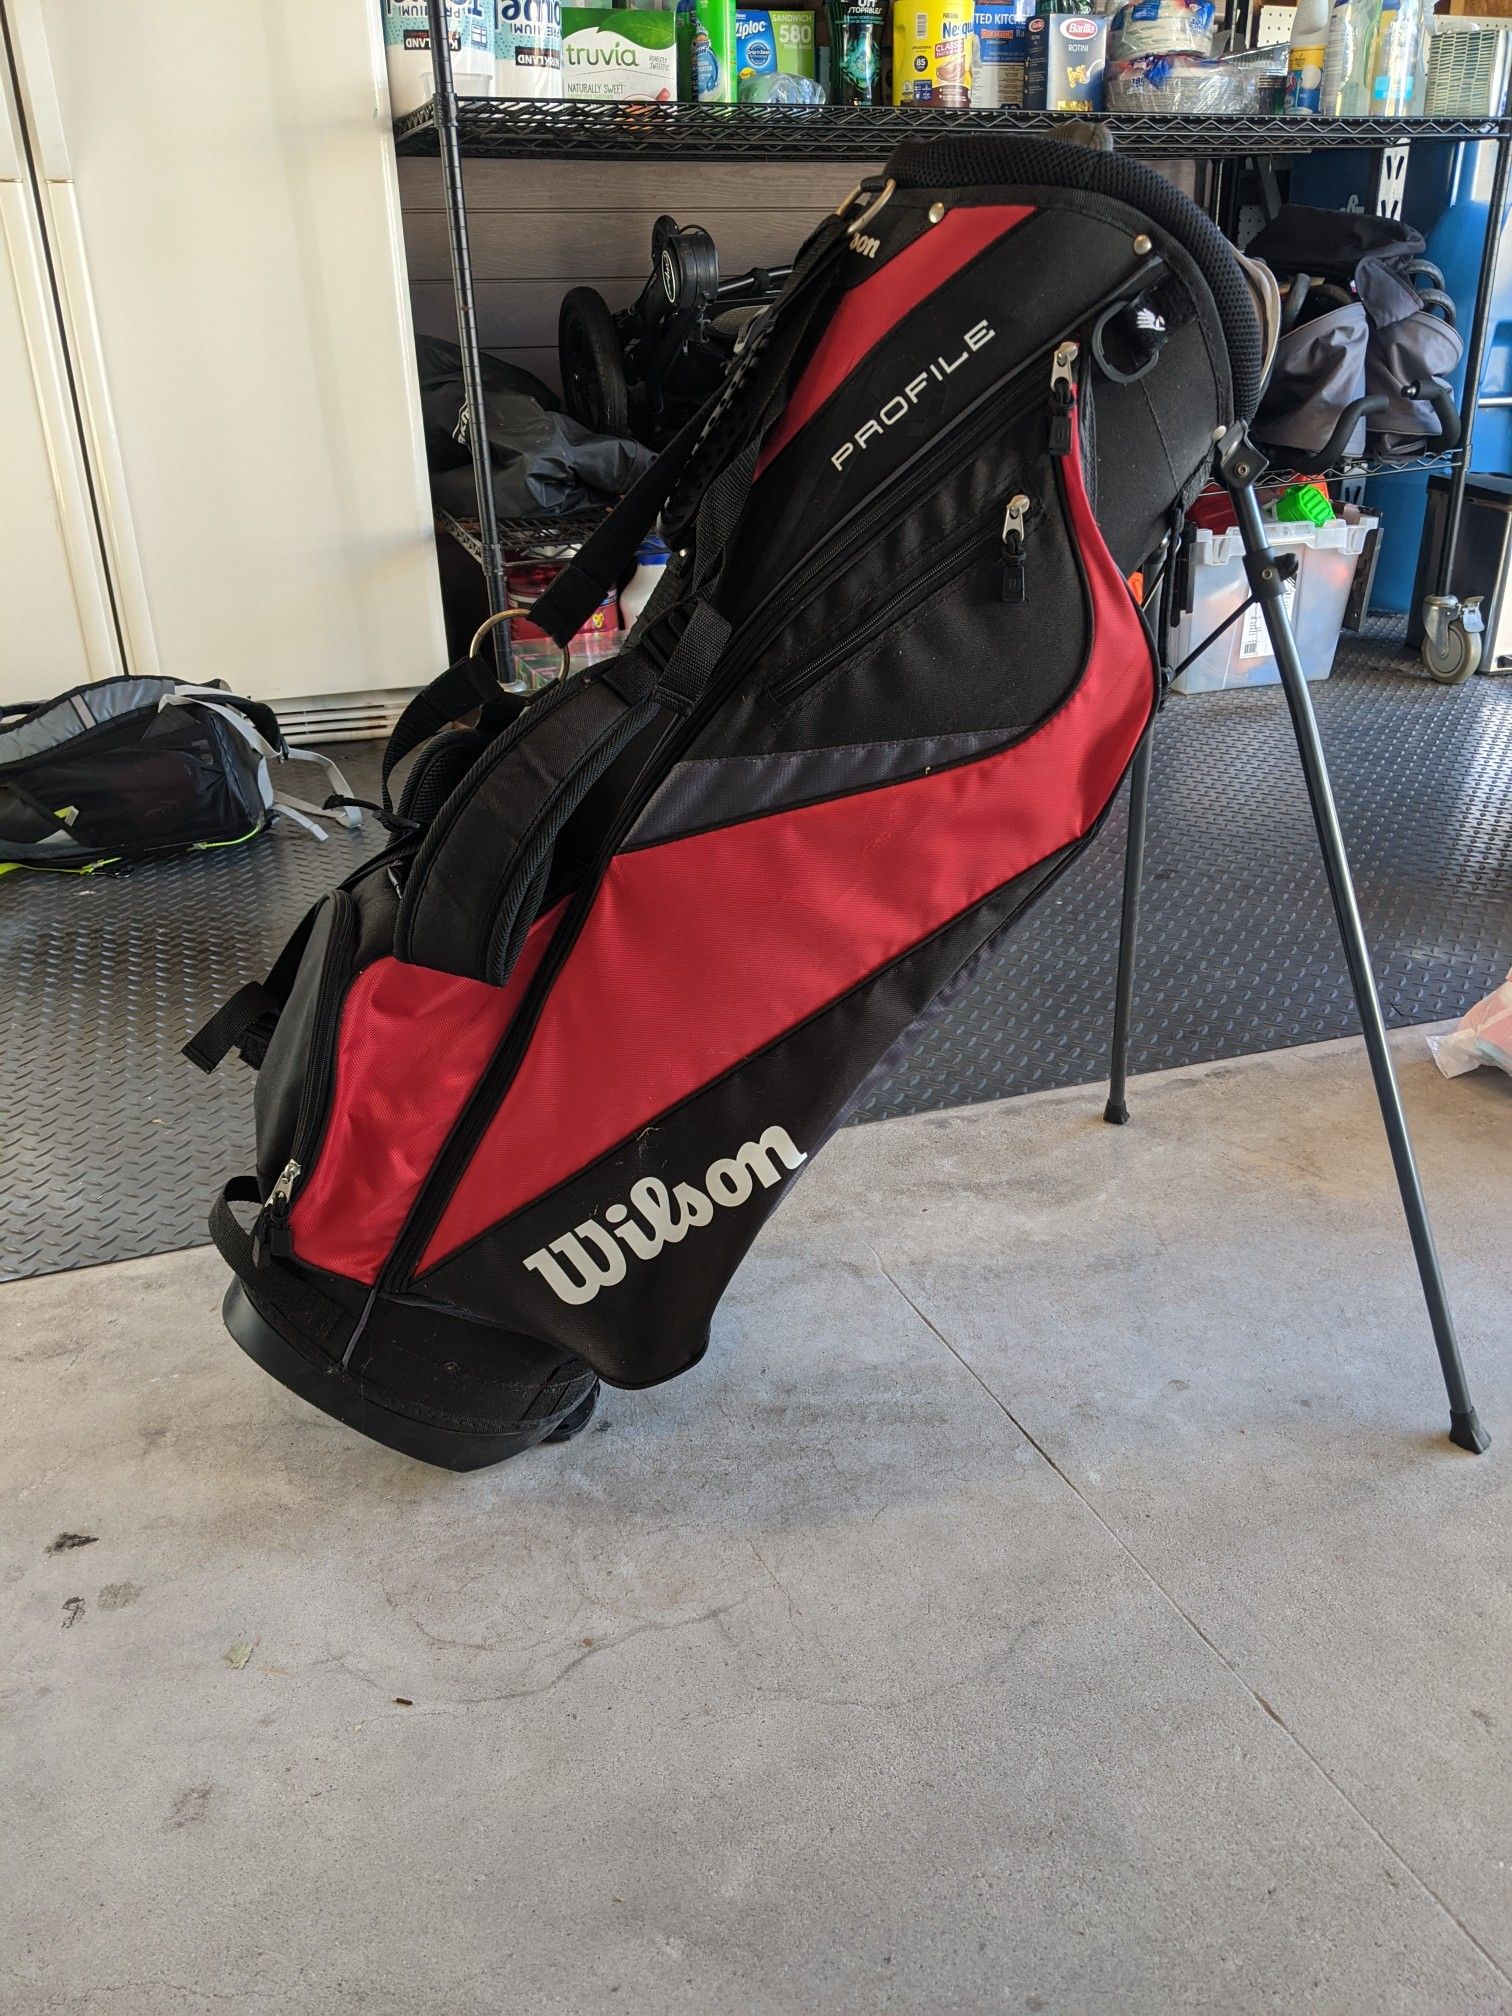 Wilson Profile golf bag with stand